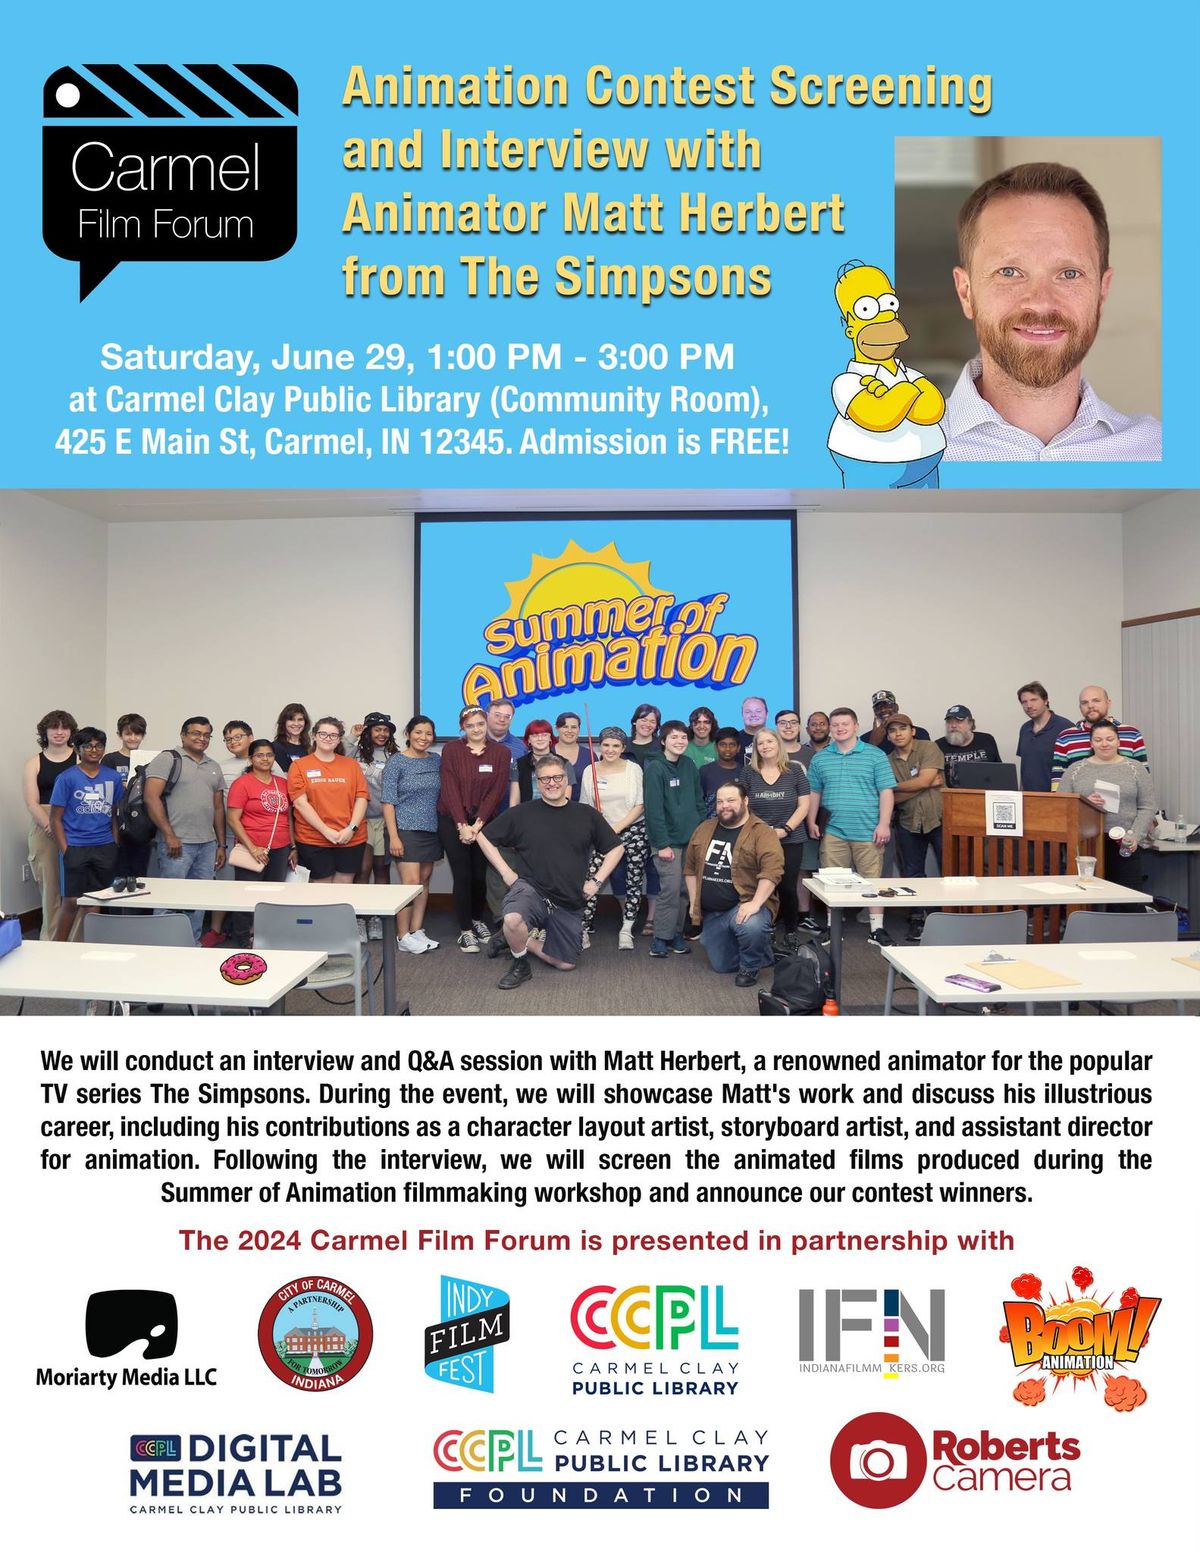 2024 Carmel Film Forum- Animation Contest Screening and Interview with Animator Matt Herbert from The Simpsons